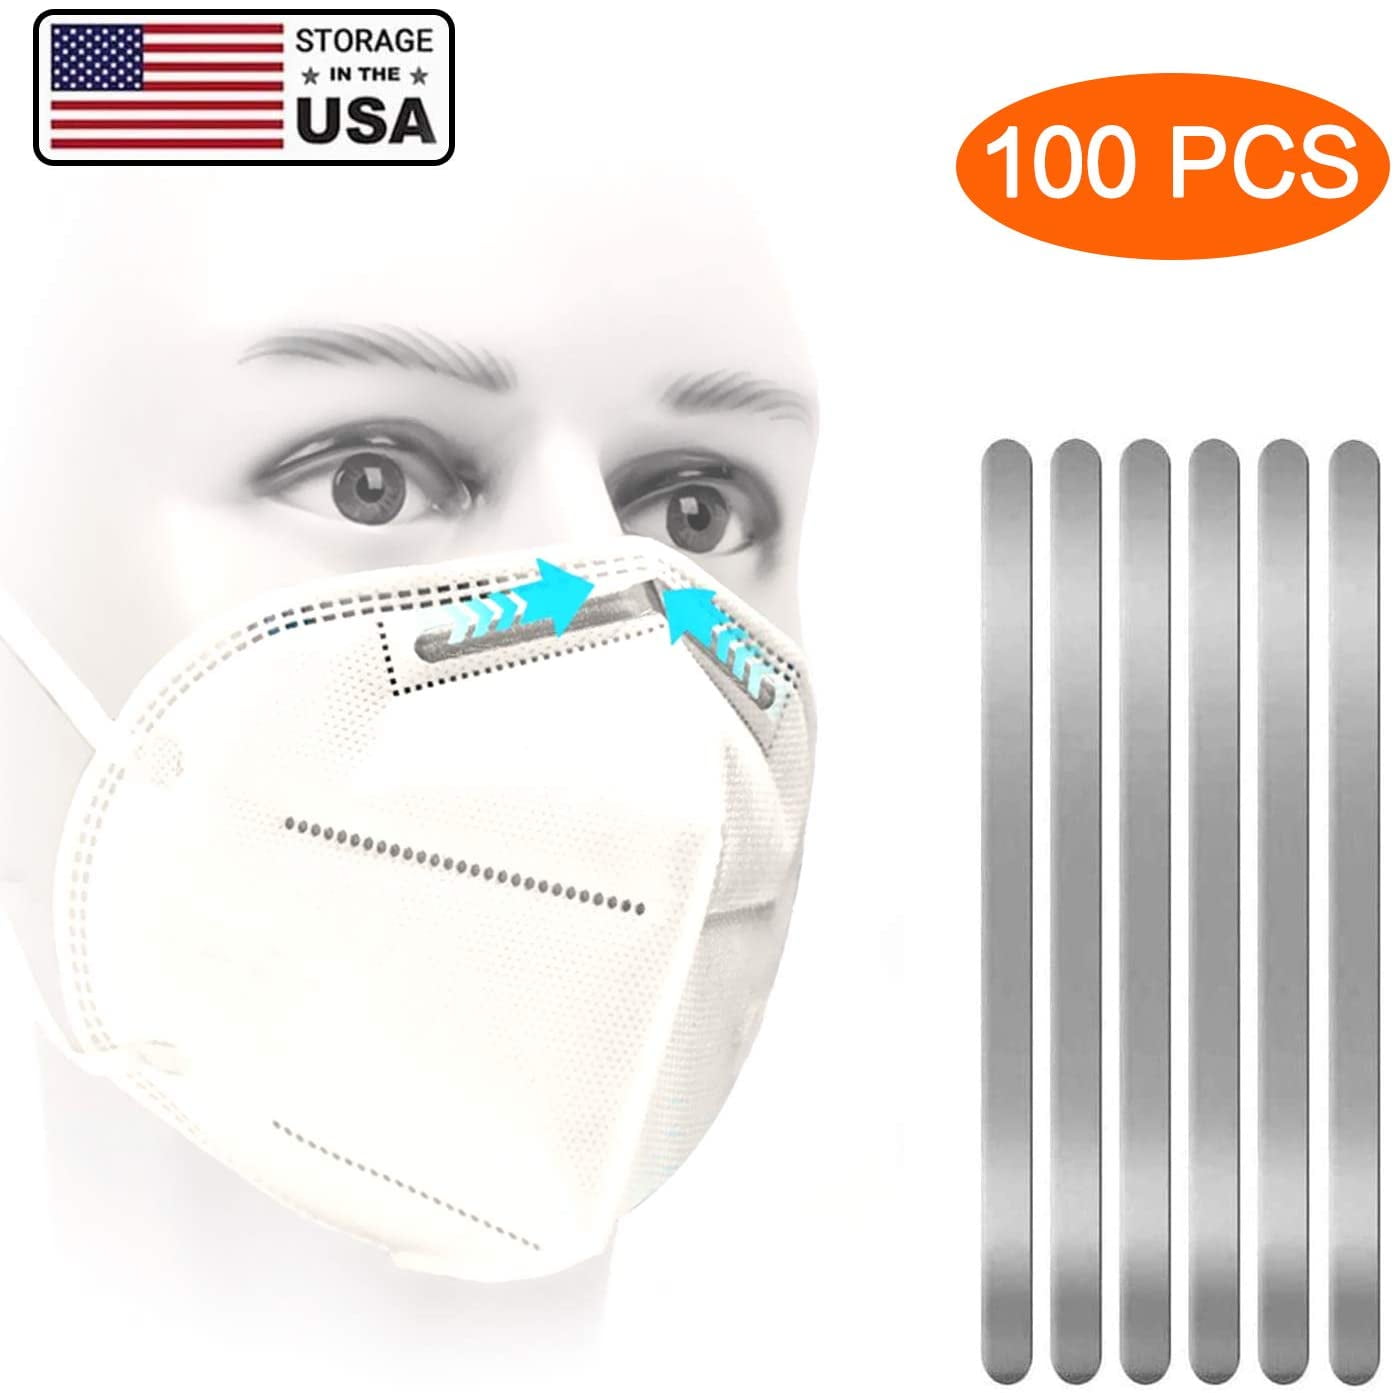 100PCS Flexed and Adjusted Freely Without Fatigue or Stress on The Skin Aluminum Strips Straps Nose Bridge Strip for DIY Mask Handmade Crafting Making Nose Bridge Clip Aluminum Strip Nose Bridge 